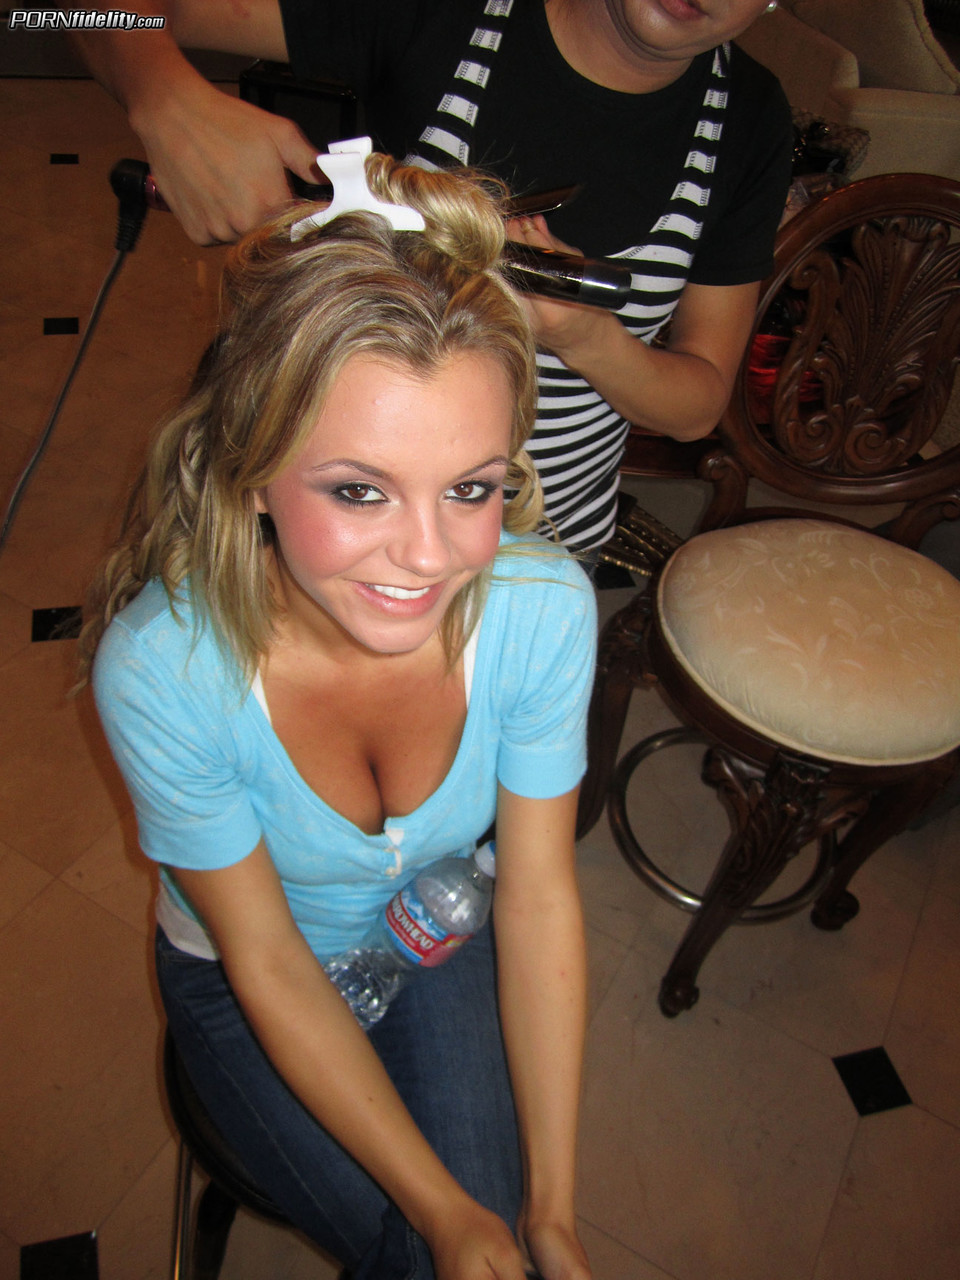 Attractive women Bree Olson & Kelly Madison strip together and pose for camera ポルノ写真 #425364725